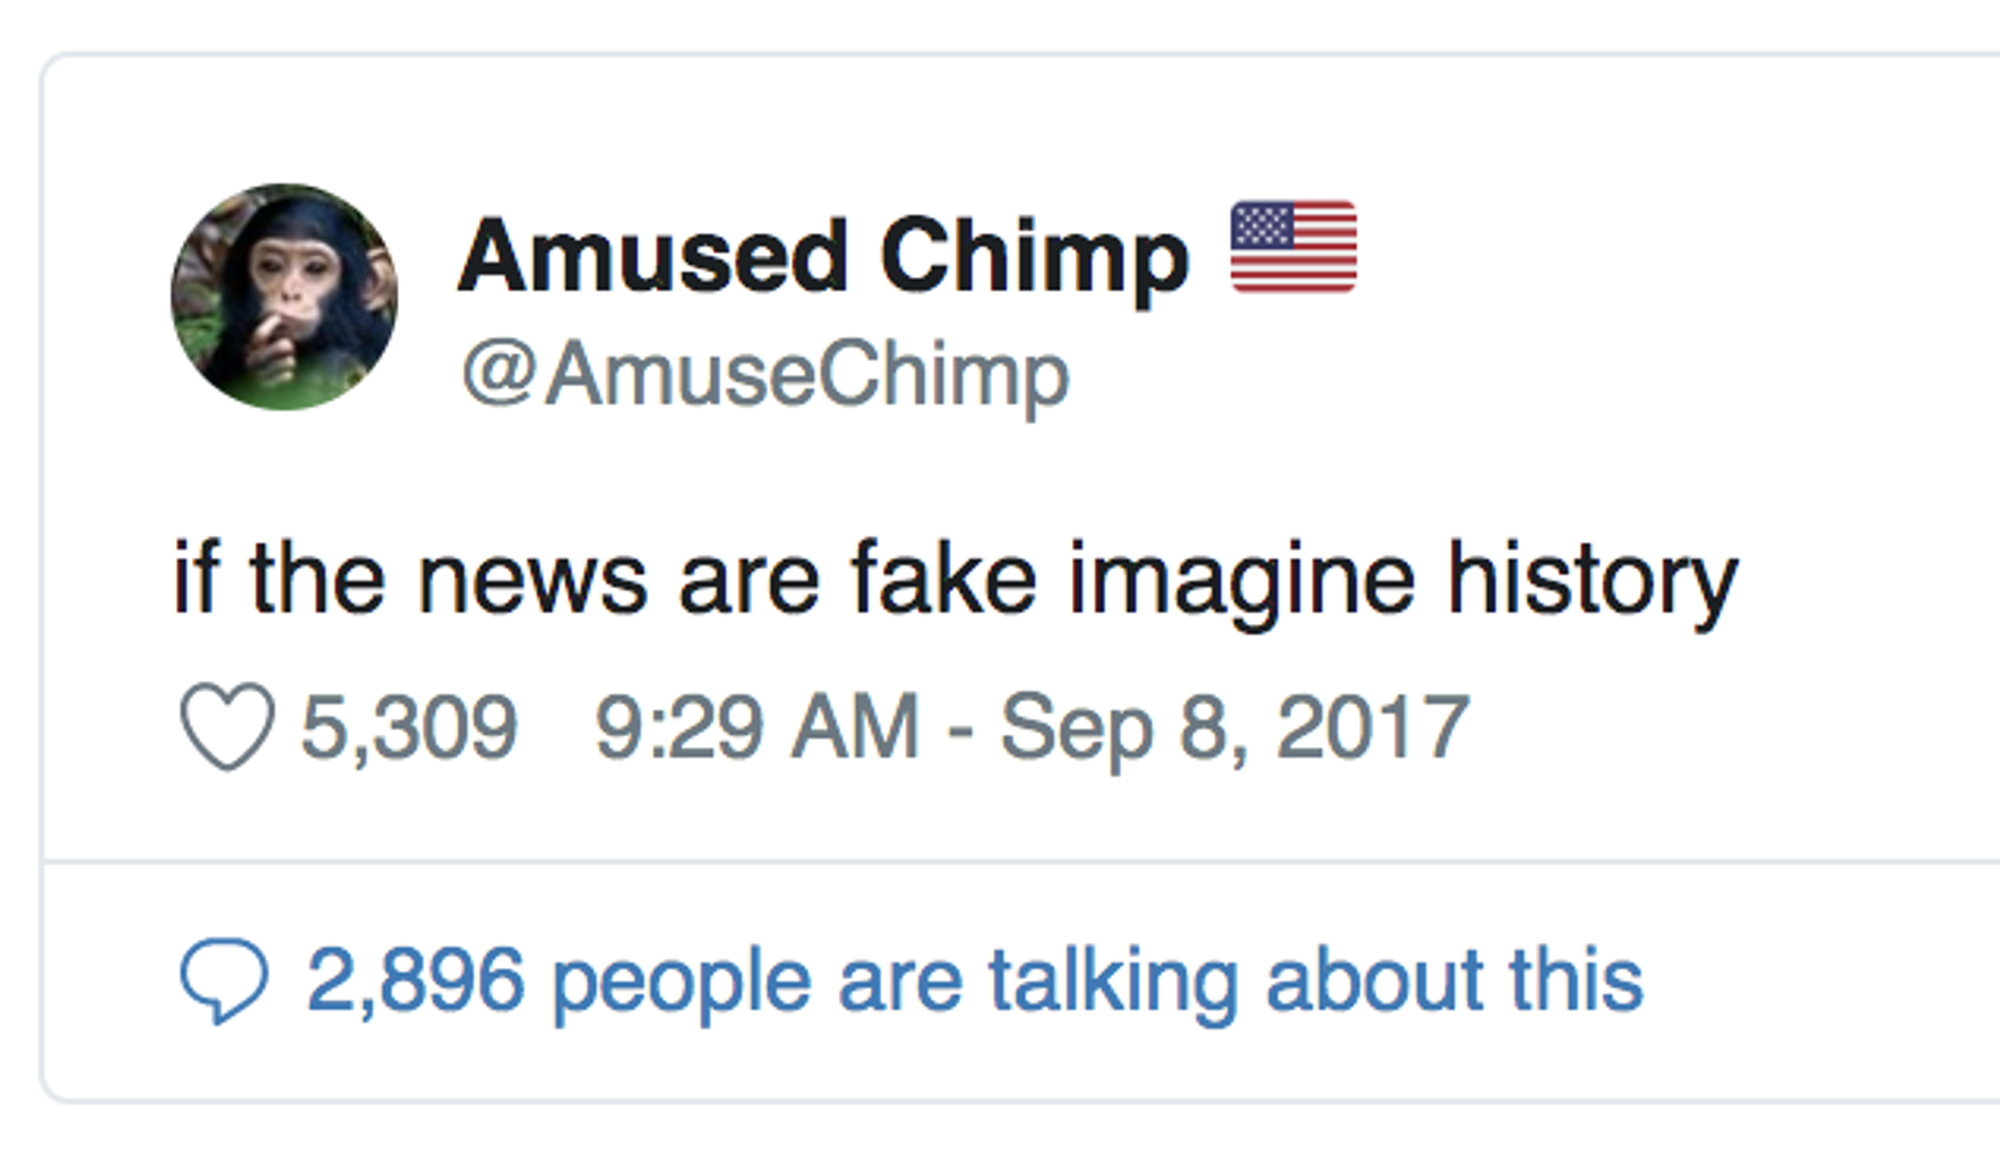 If the news are fake imagine history